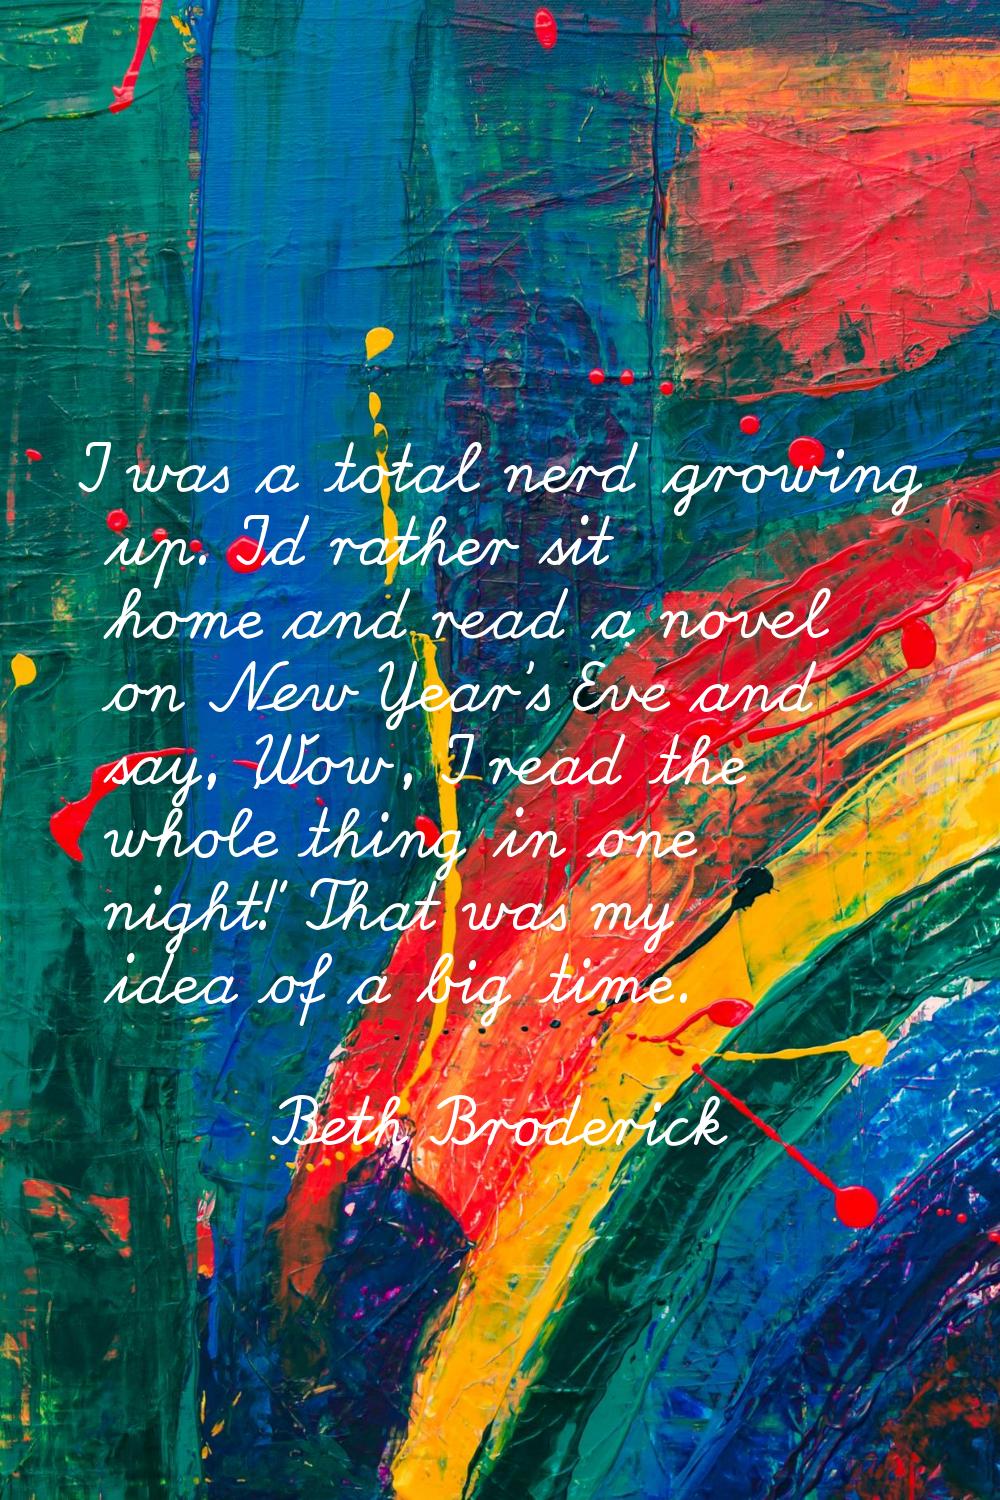 I was a total nerd growing up. I'd rather sit home and read a novel on New Year's Eve and say, 'Wow